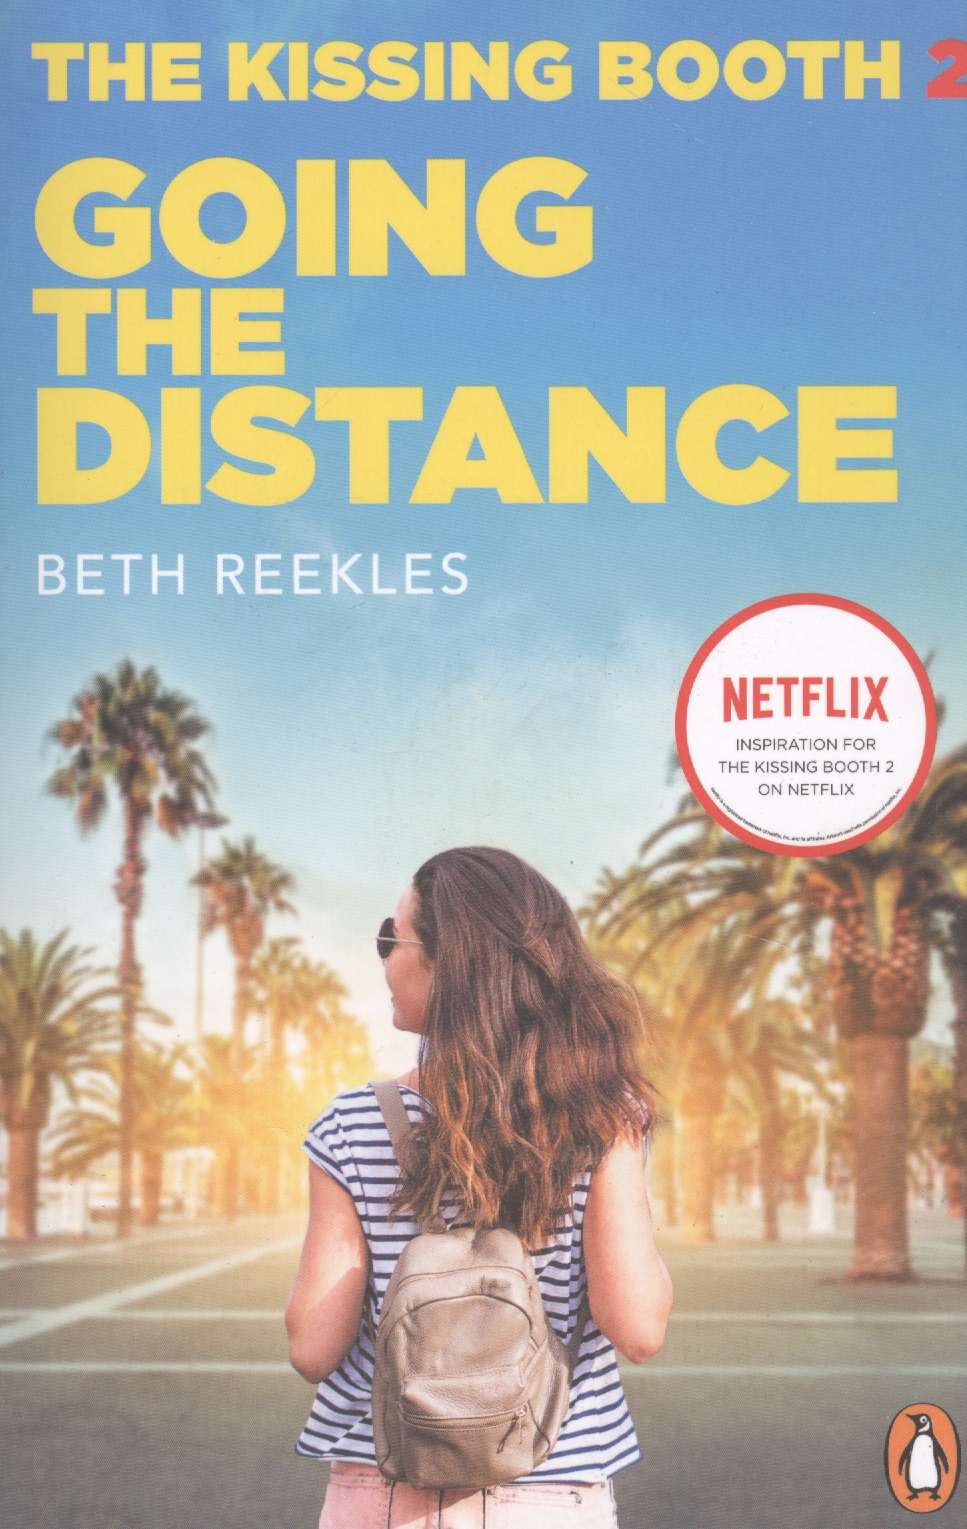 Reekles Beth The Kissing Booth 2: Going the Distance reekles beth going the distance